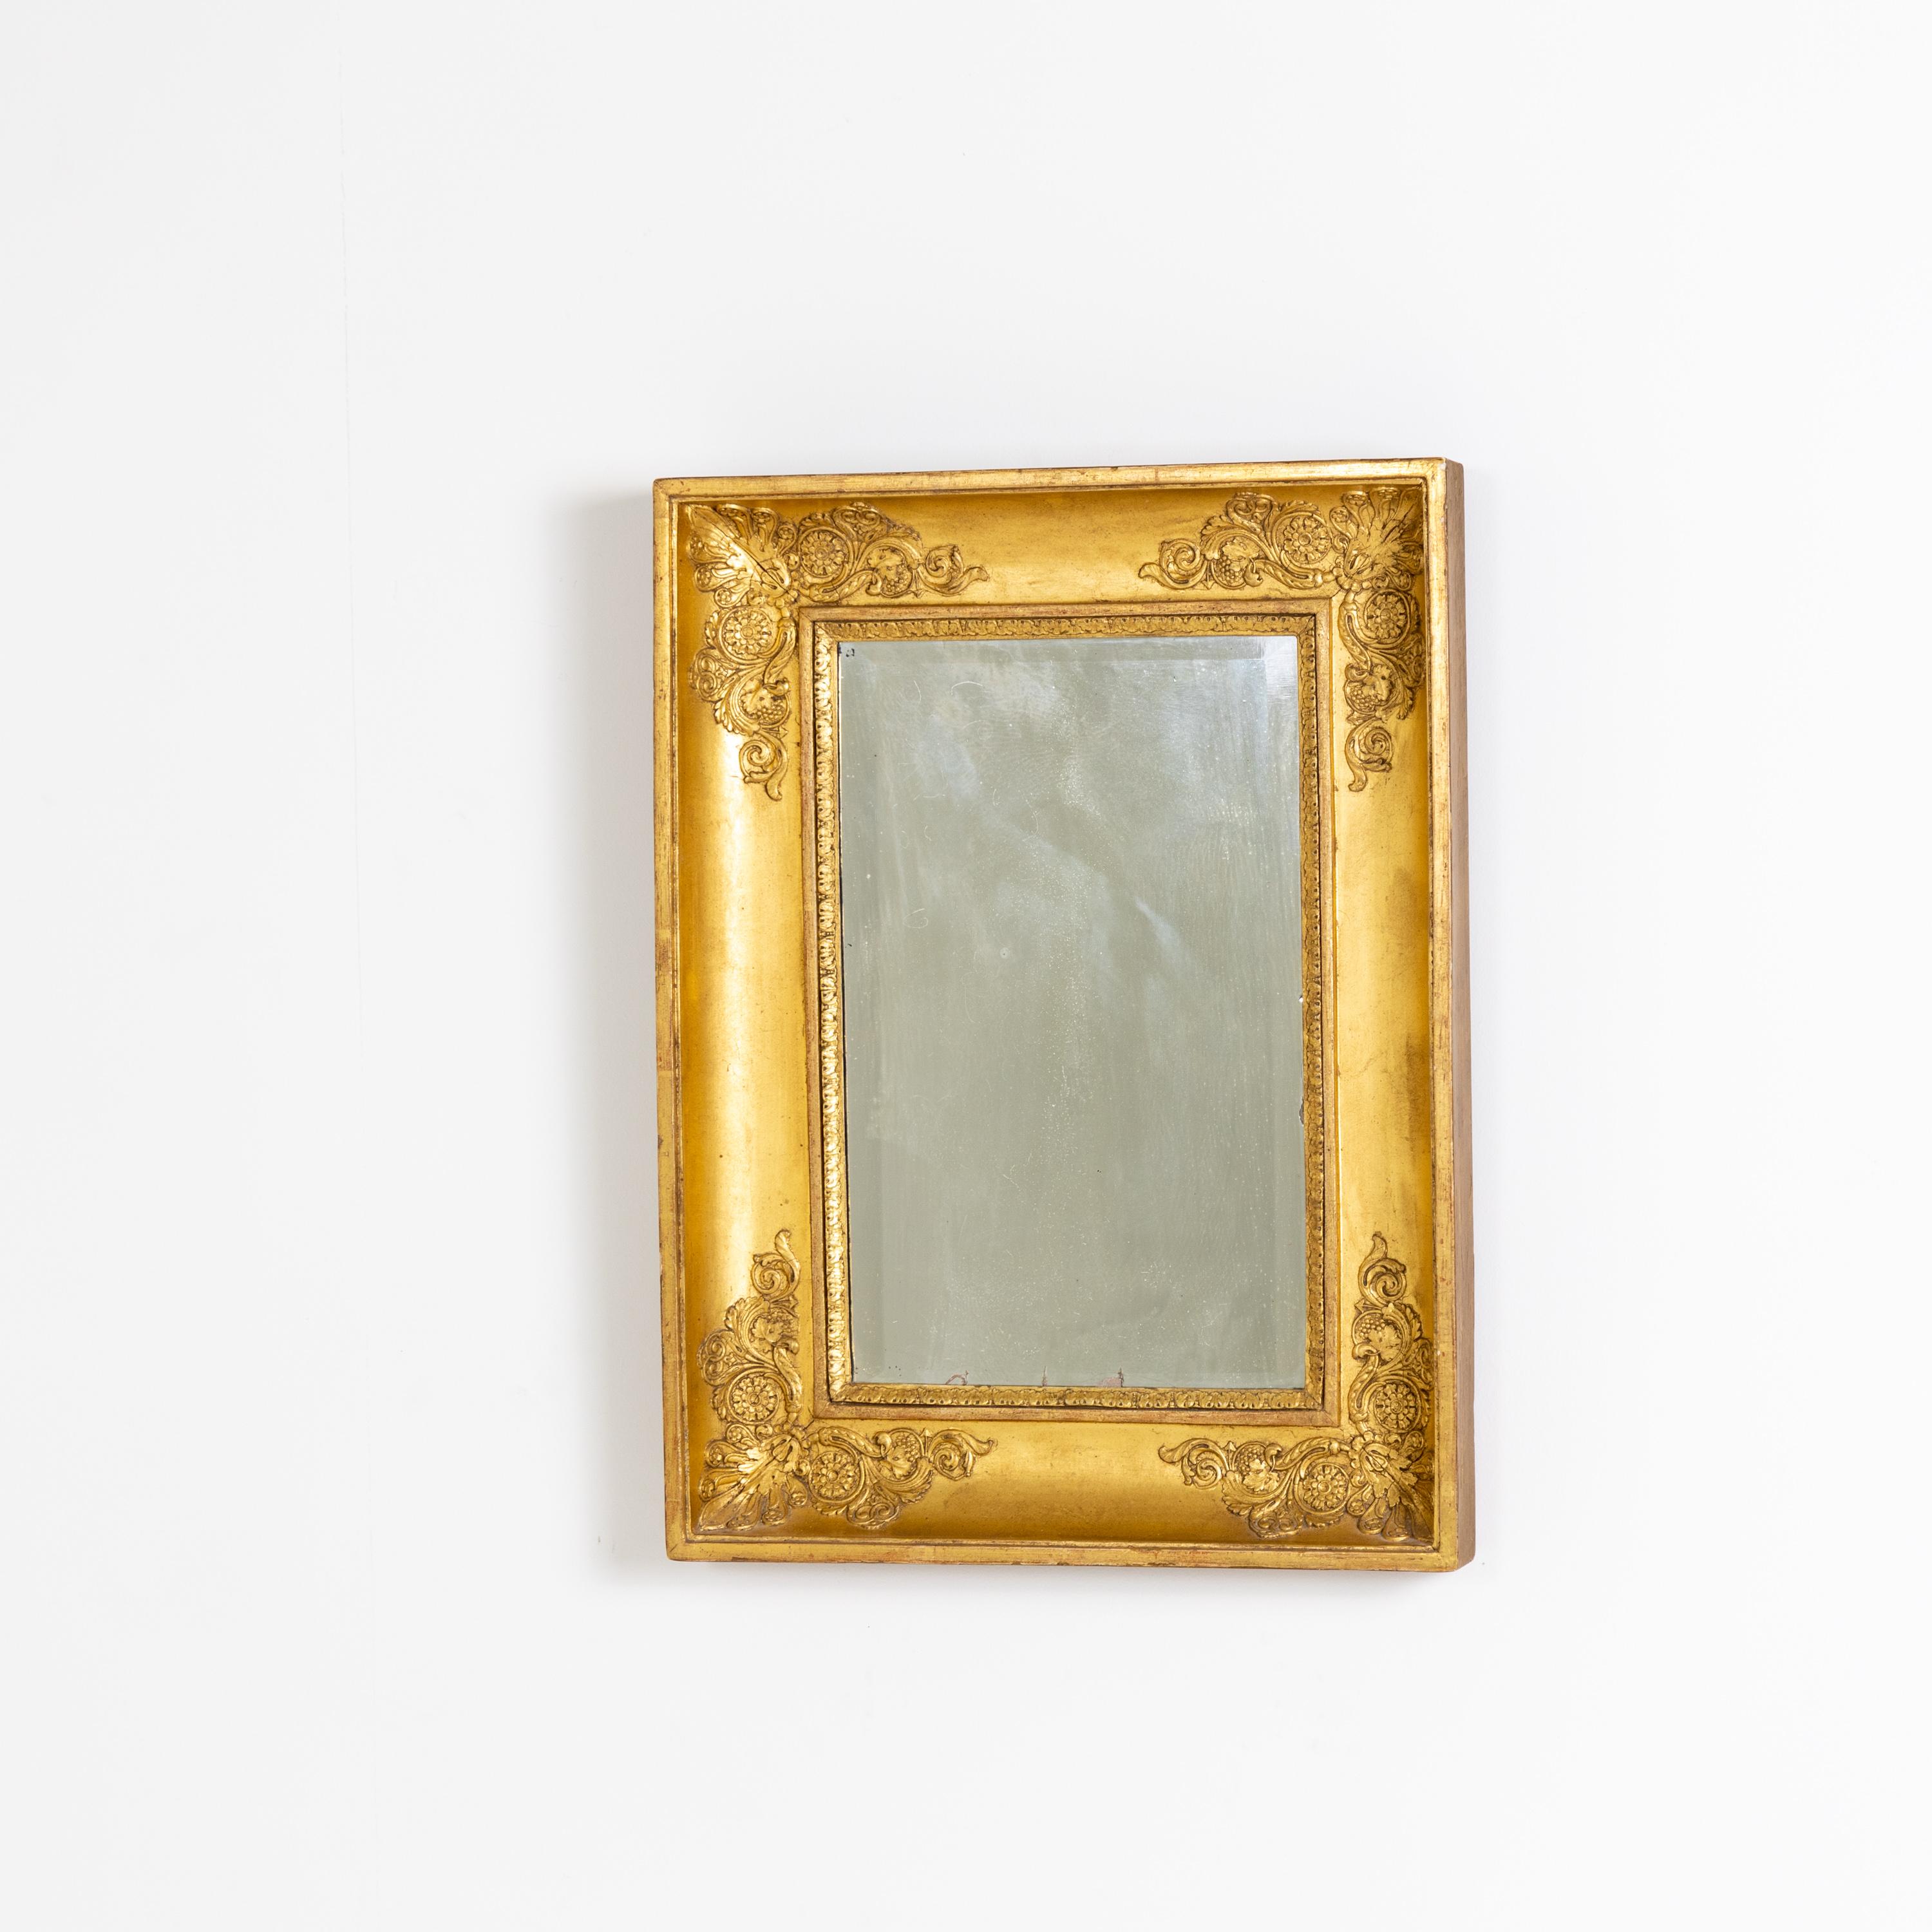 Giltwood Neoclassical Gilt Wall Mirror, Early 19th Century